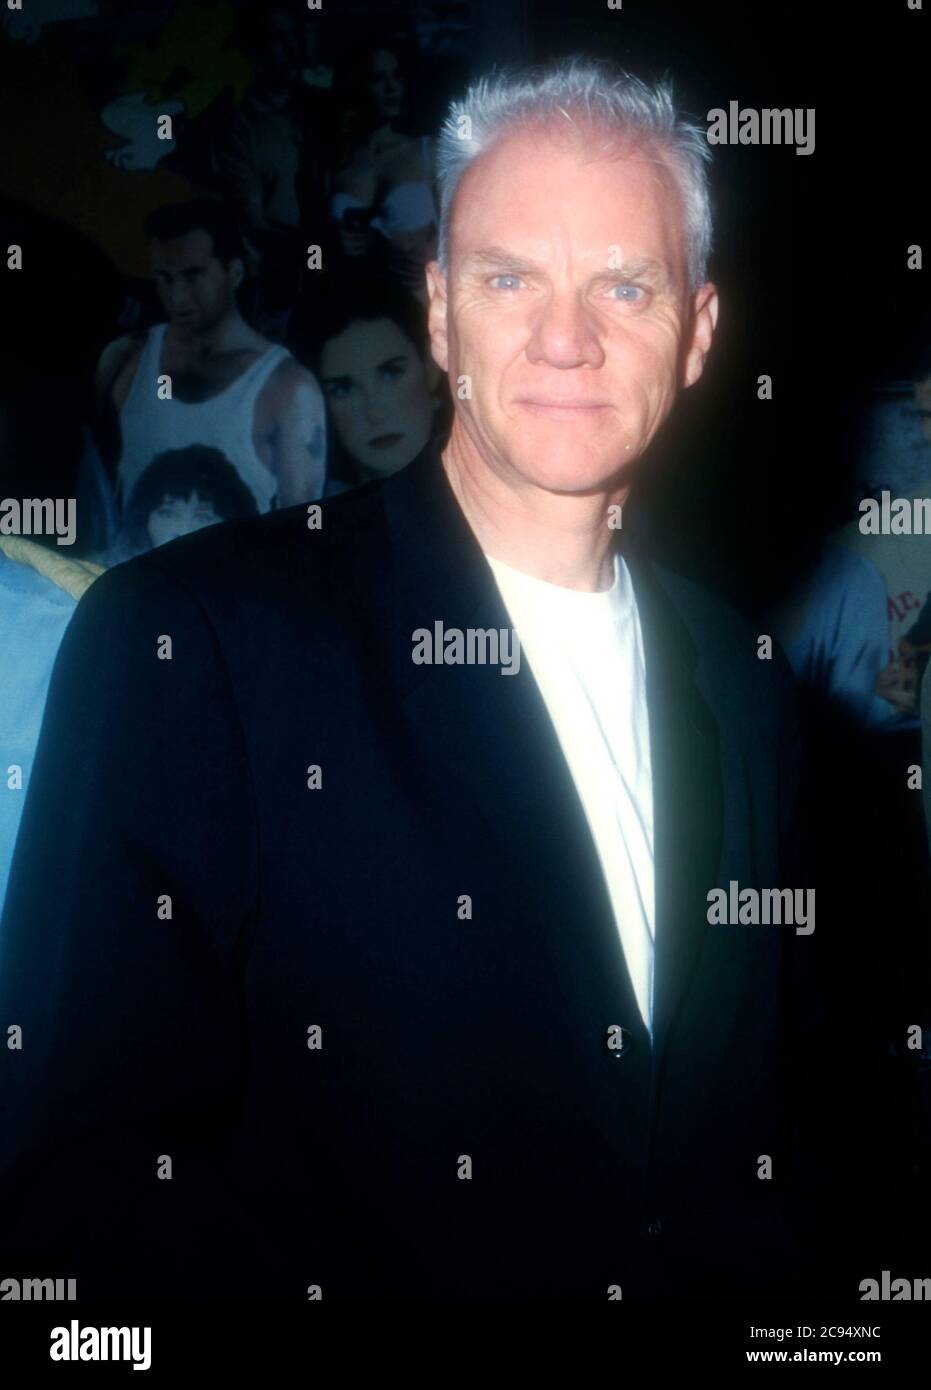 Los Angeles, California, USA 8th February 1996 Actor Malcolm McDowell attends Wings Commander 4 Costume Presentation on February 8, 1996 at Planet Hollywood in Los Angeles, California, USA. Photo by Barry King/Alamy Stock Photo Stock Photo